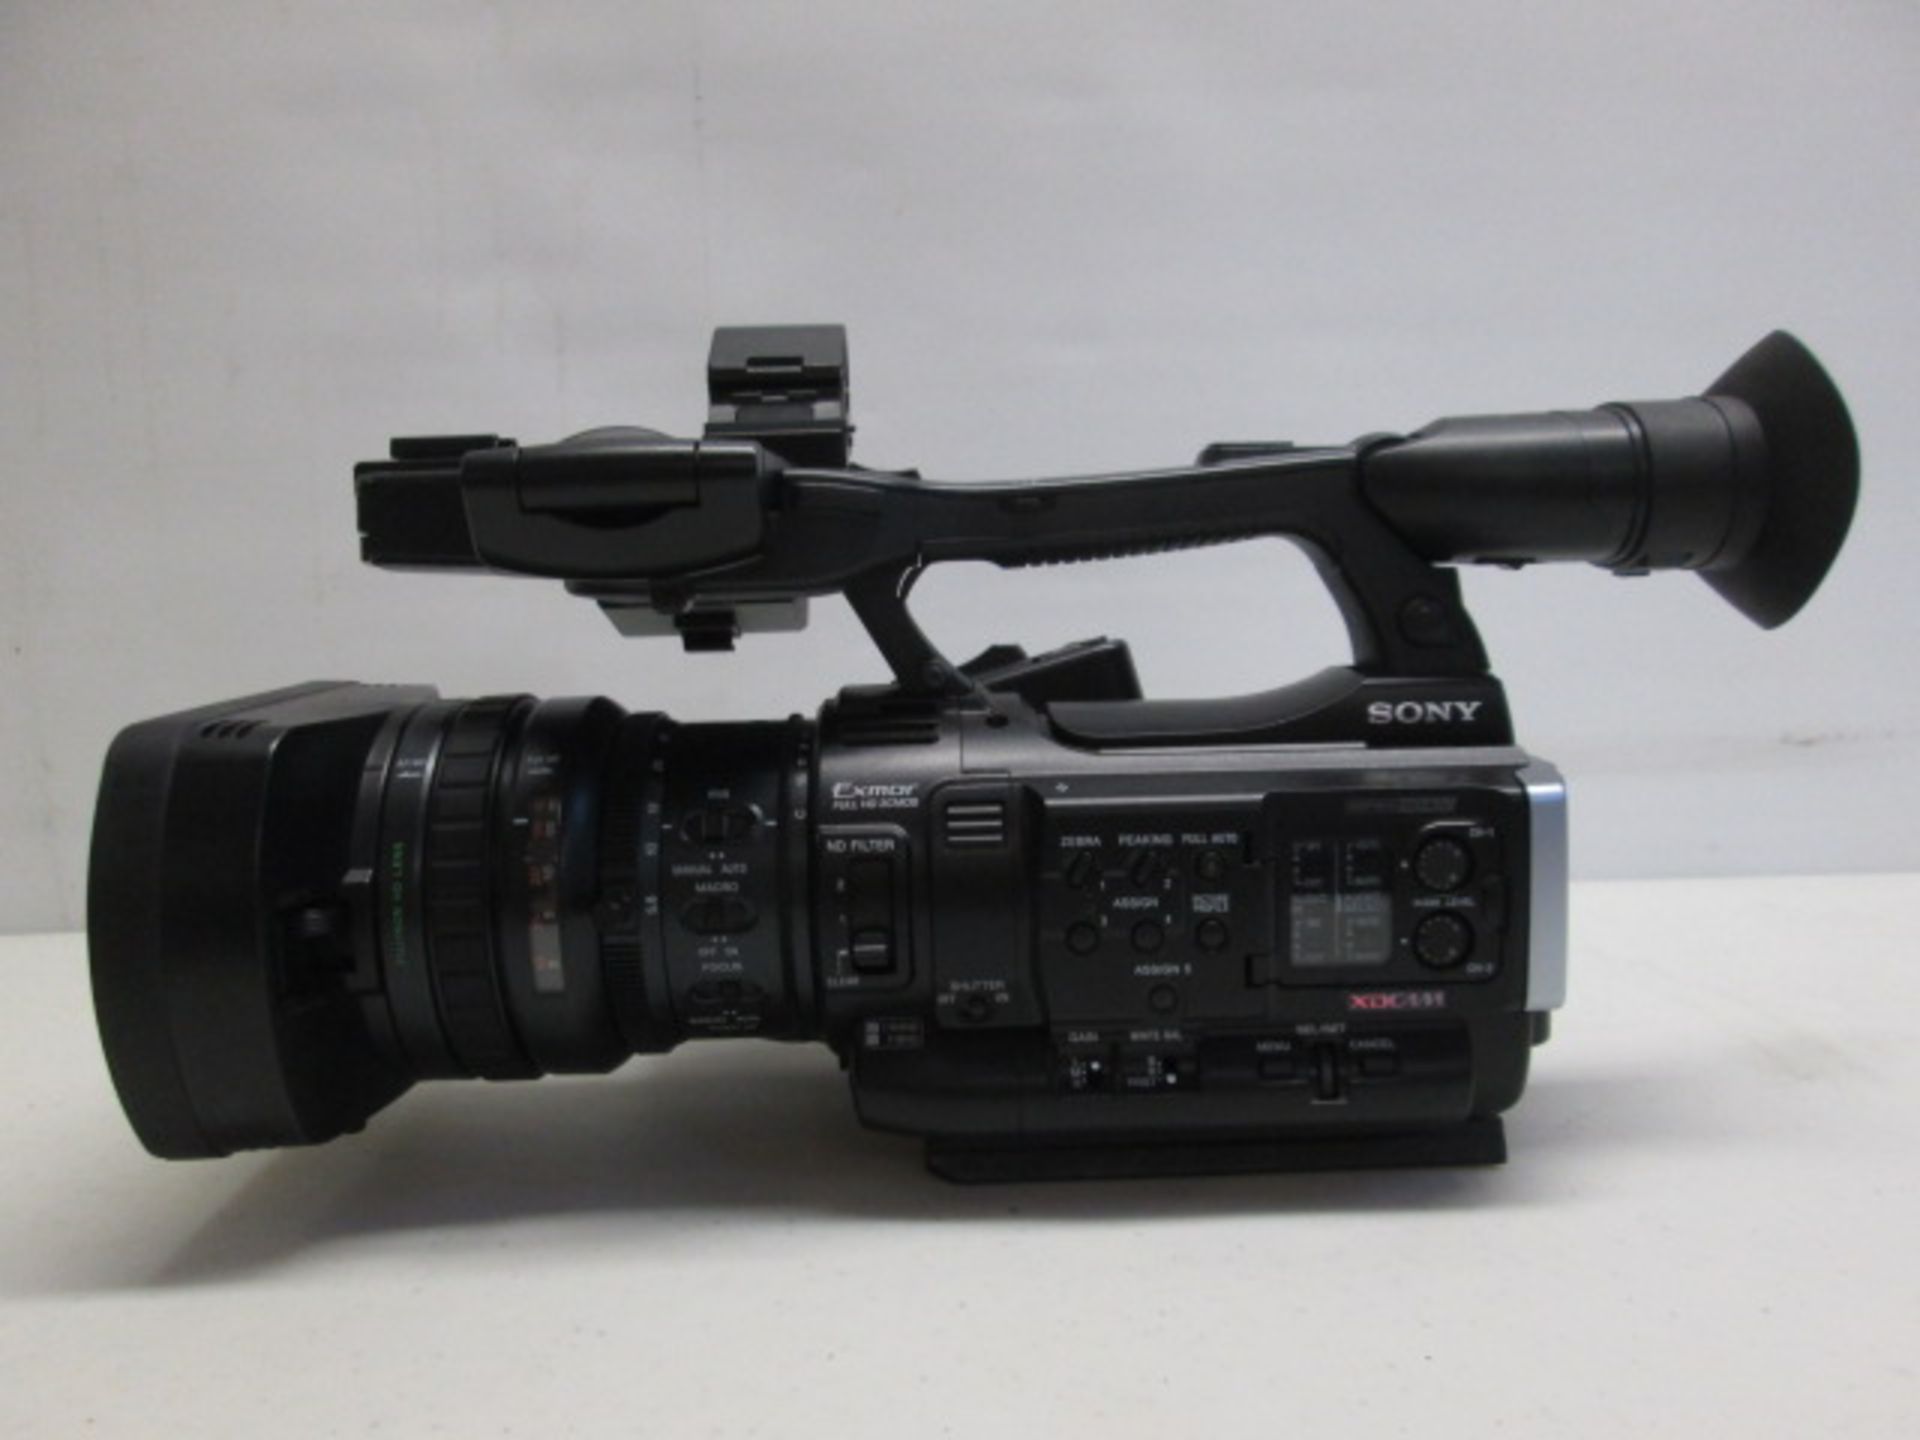 Sony PMW-200 XD Cam, Professional Exmor Full HD Video Camera. Comes with Rode NTG2 Microphone, BPU30